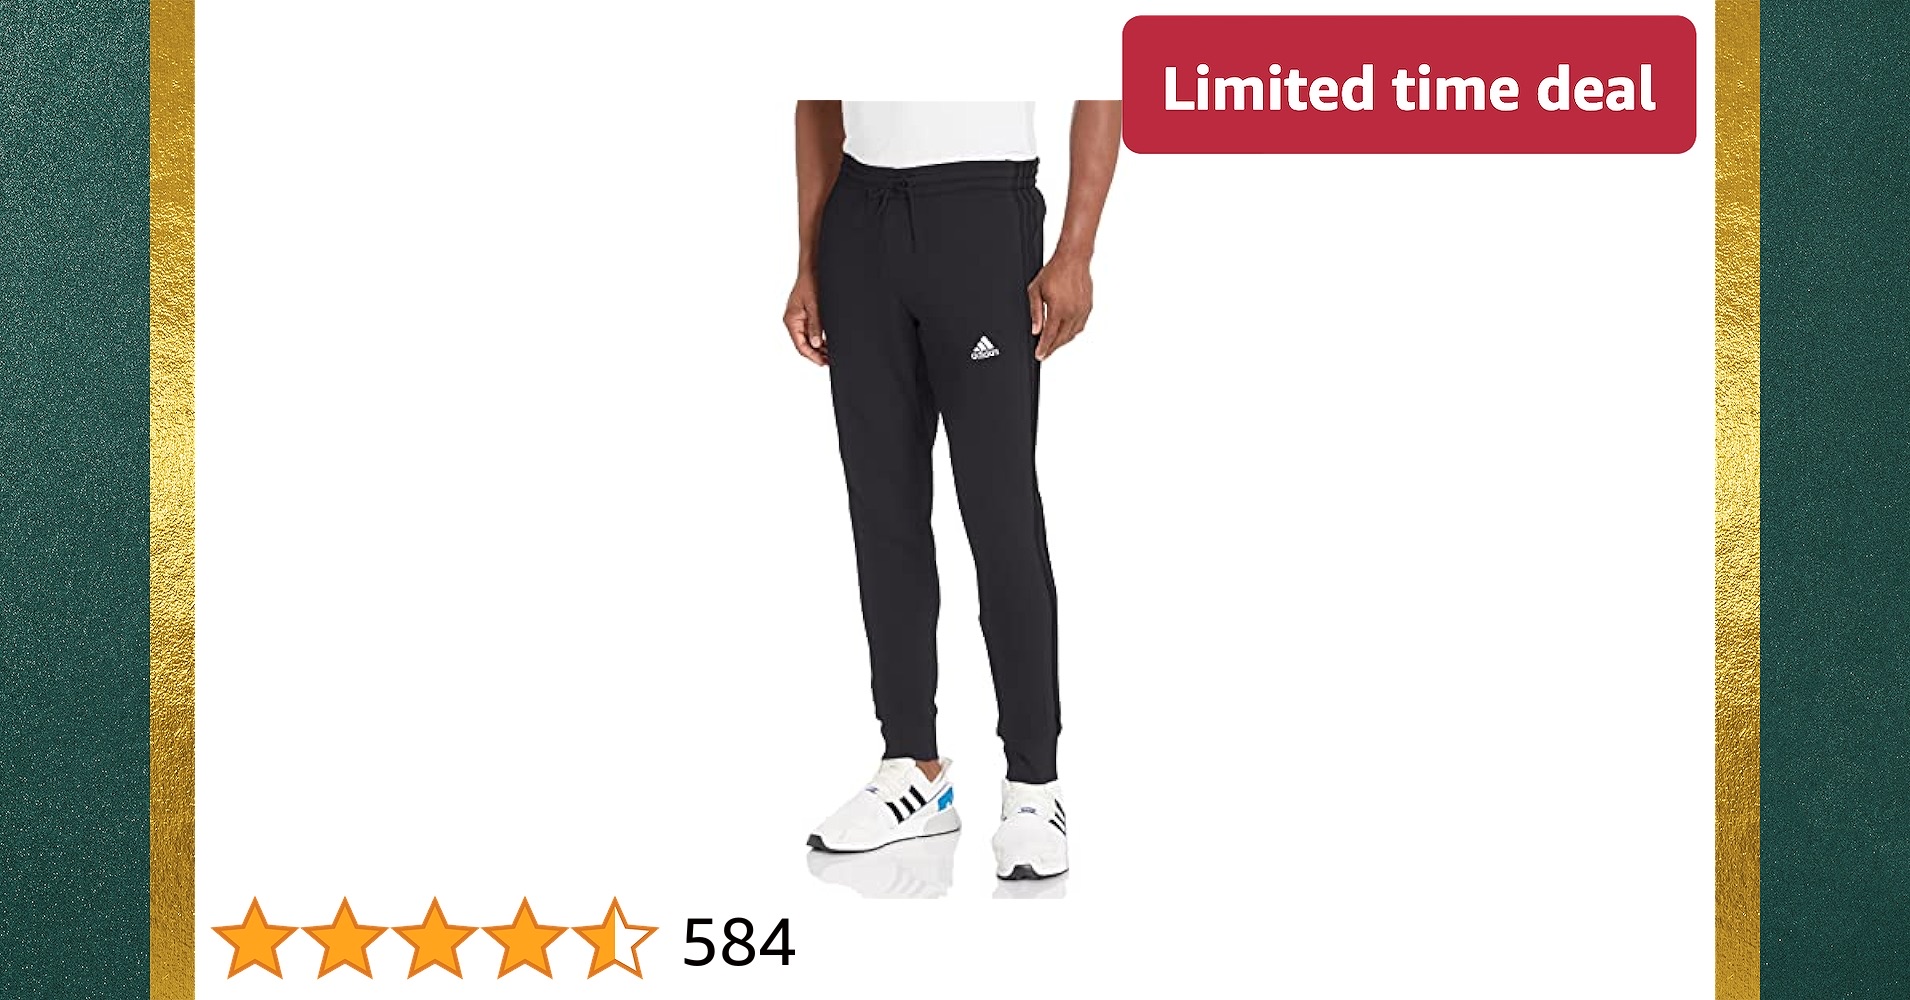 Limited-time deal: adidas Men's Essentials French Terry Cuffed 3-Stripes Pants